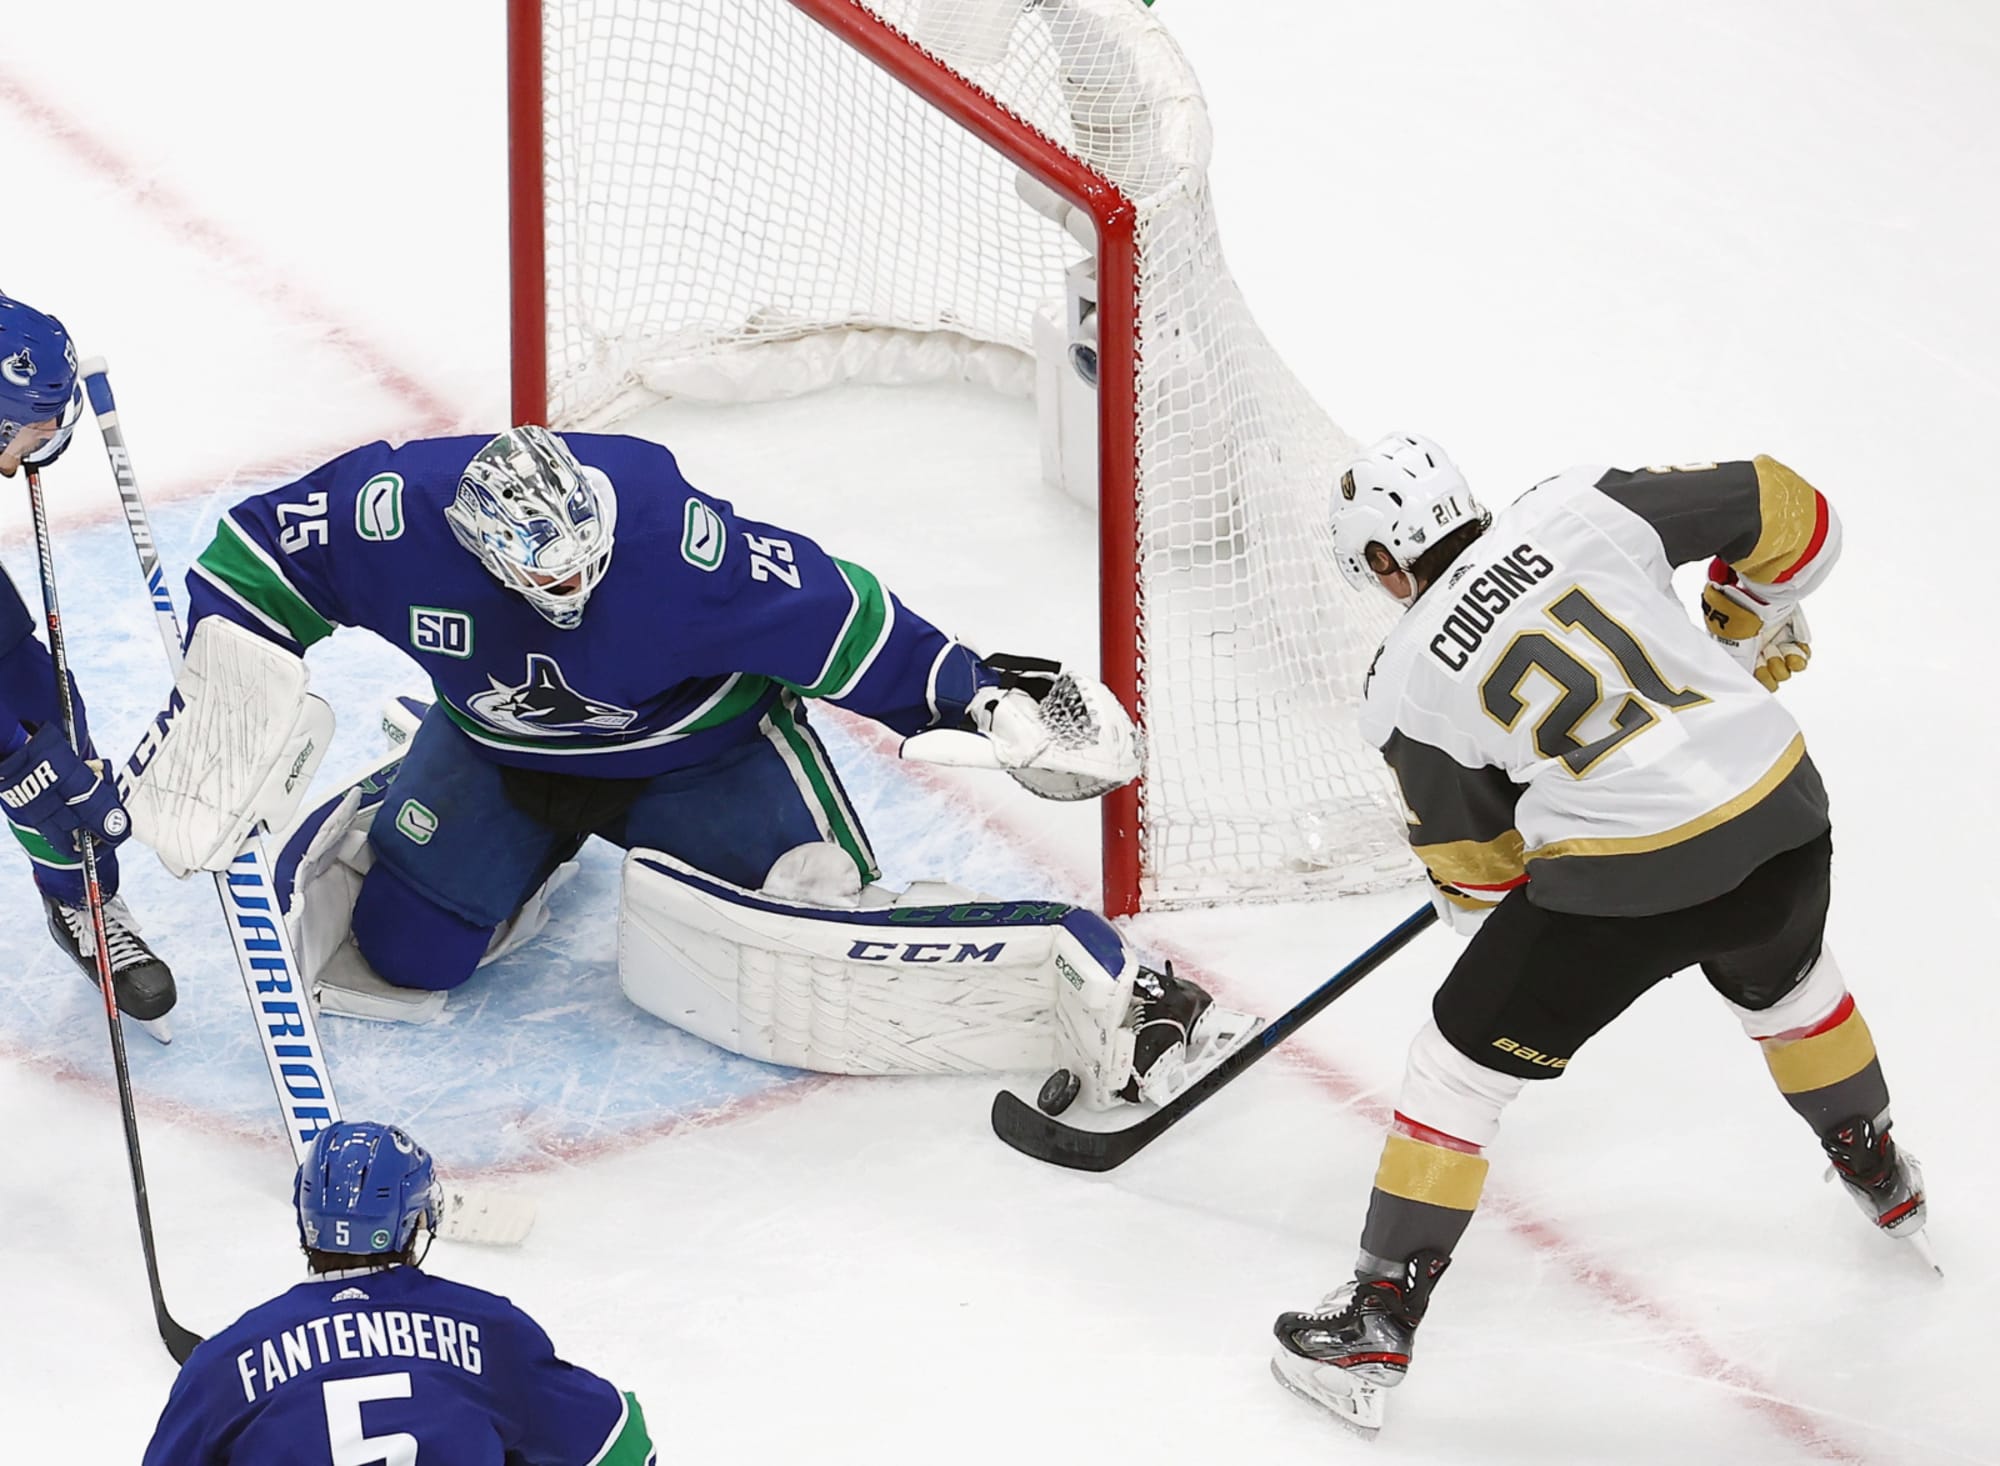 Jacob Markstrom's career-high 49 saves help Canucks hold on to beat Kings  3-2 - The Globe and Mail